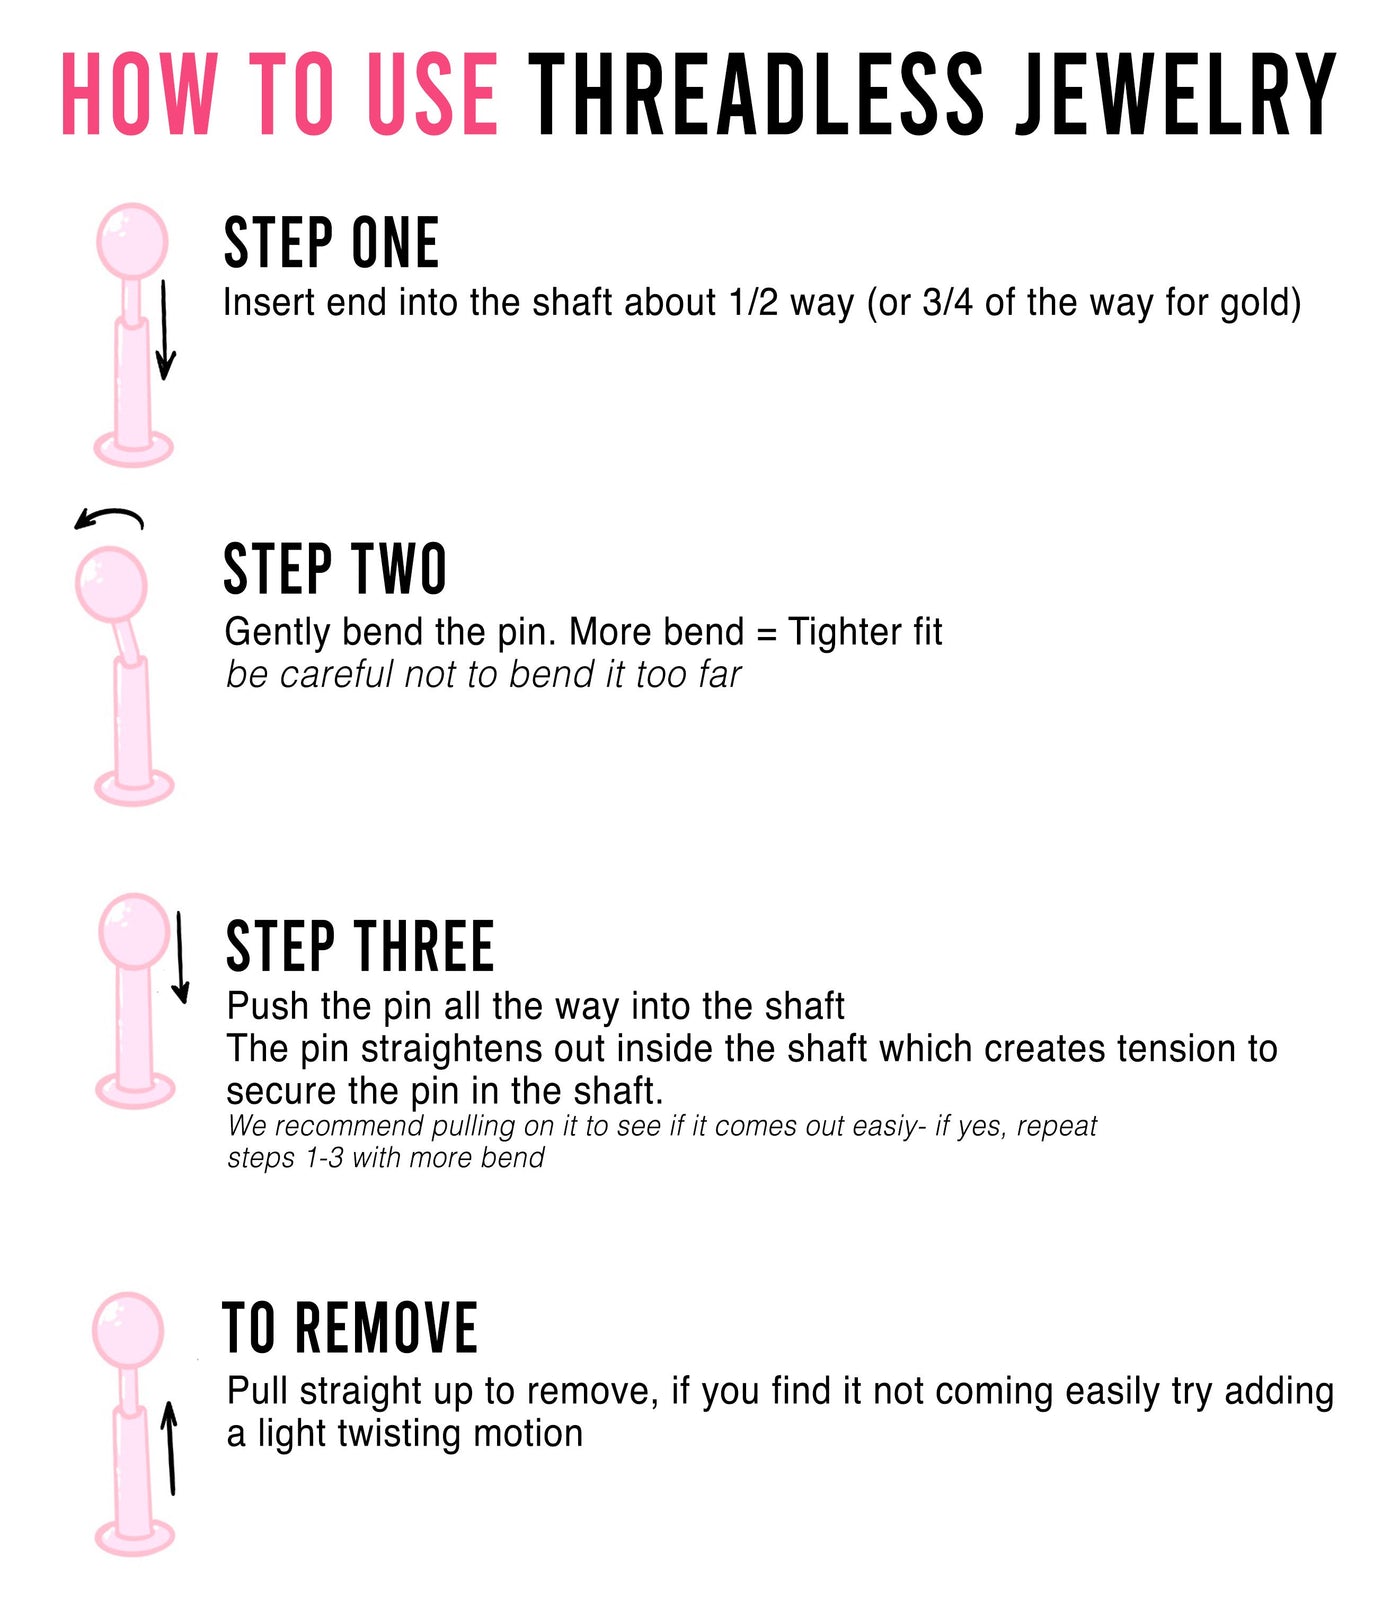 simple instructions on ho to properly insert and remove threadless jewelry